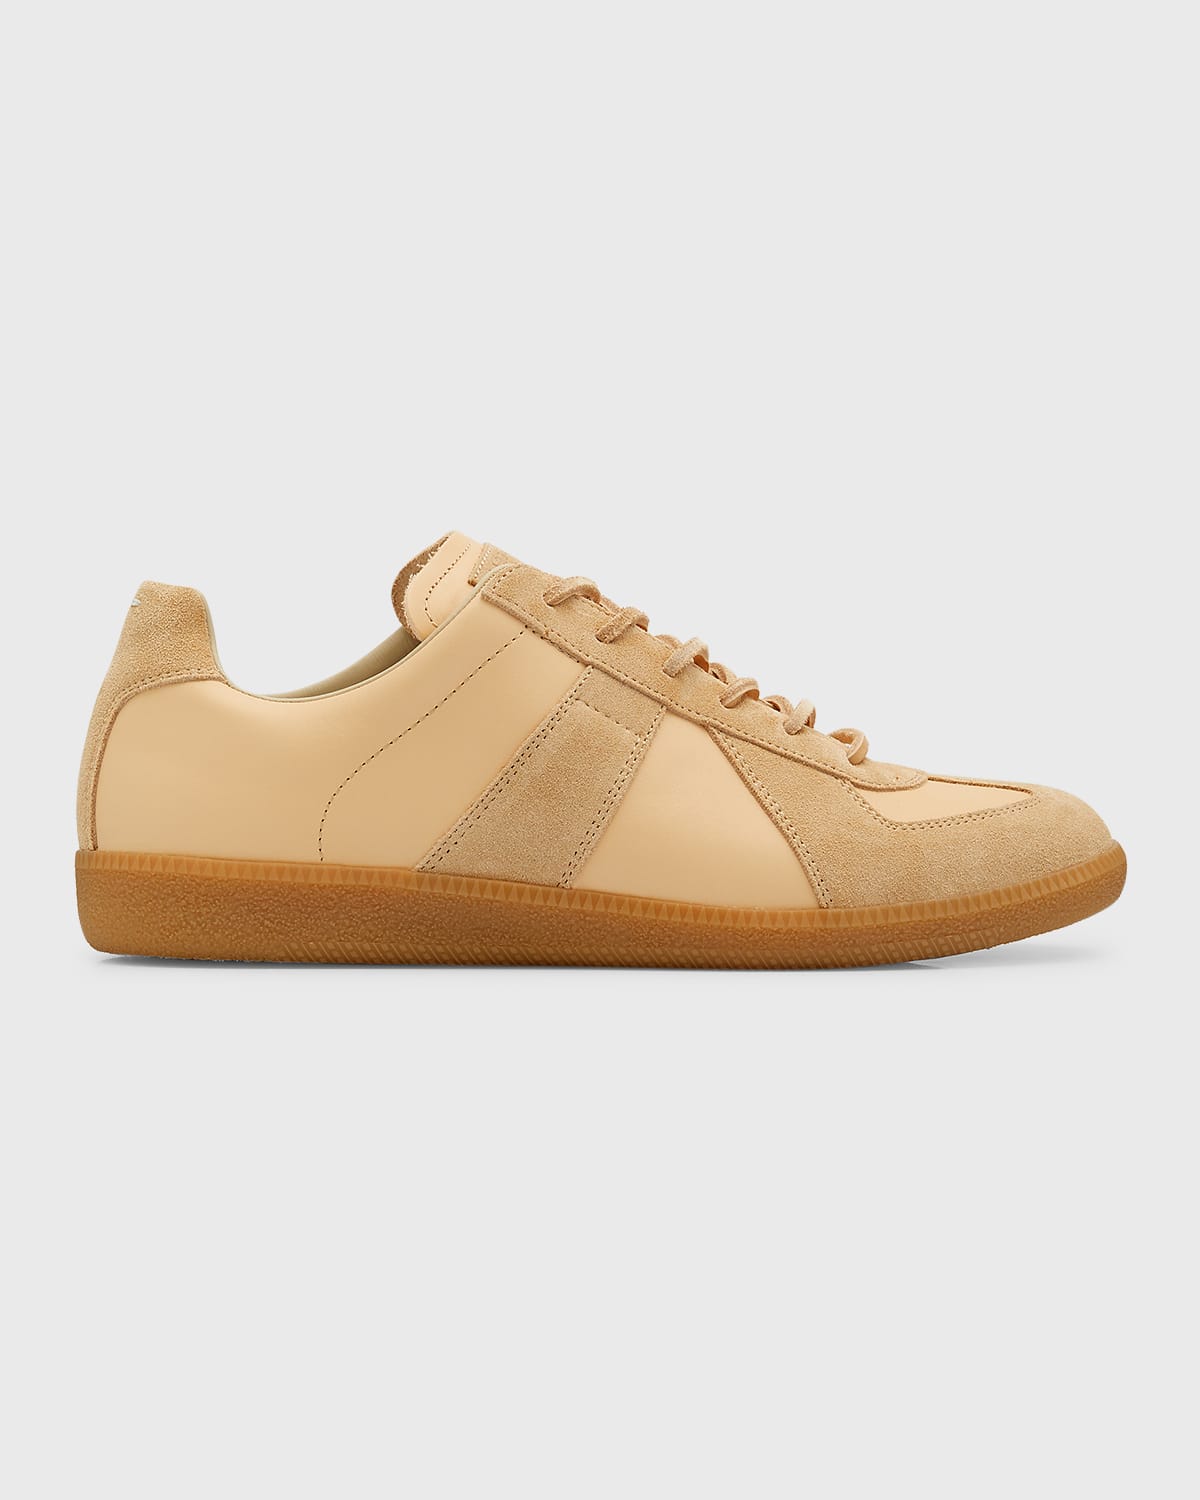 Maison Margiela Replica Leather & Suede Low Top Sneakers In Chamois